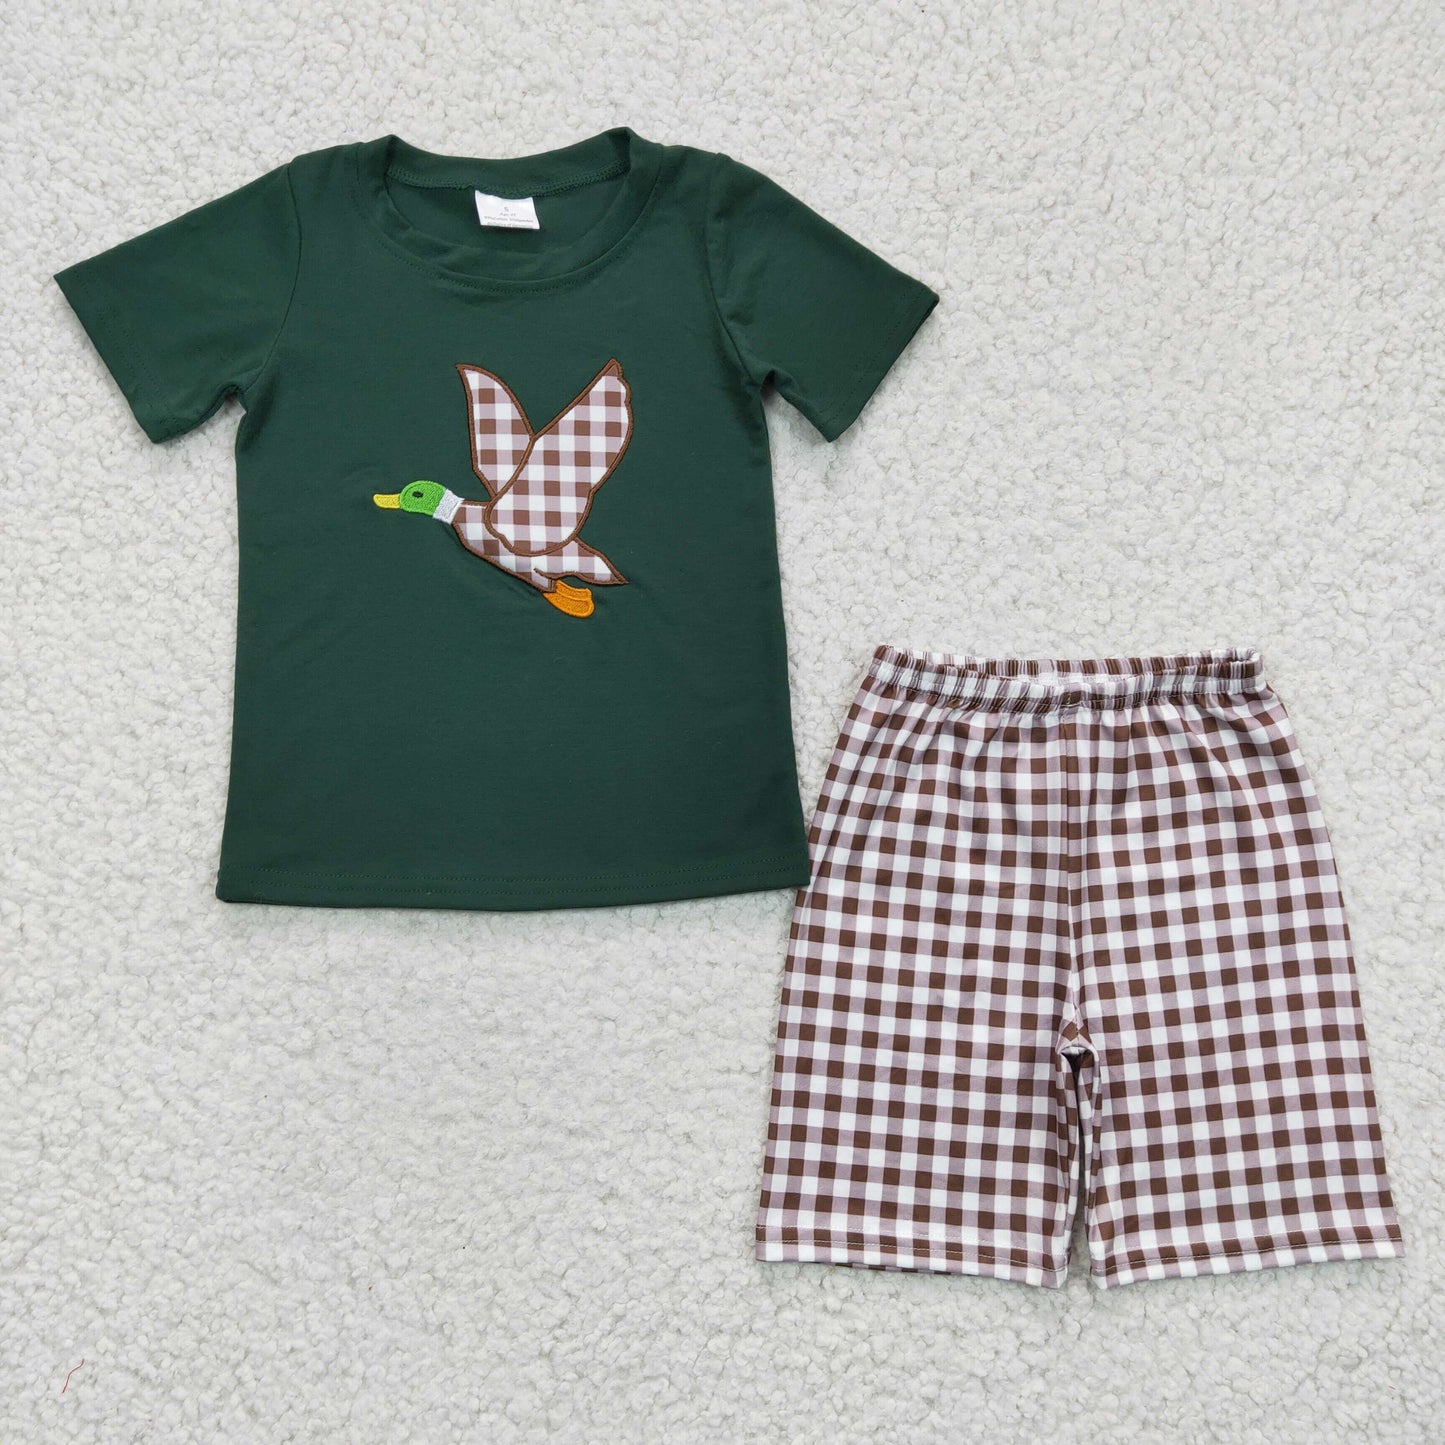 duck embroidery outfits boy's summer clothing